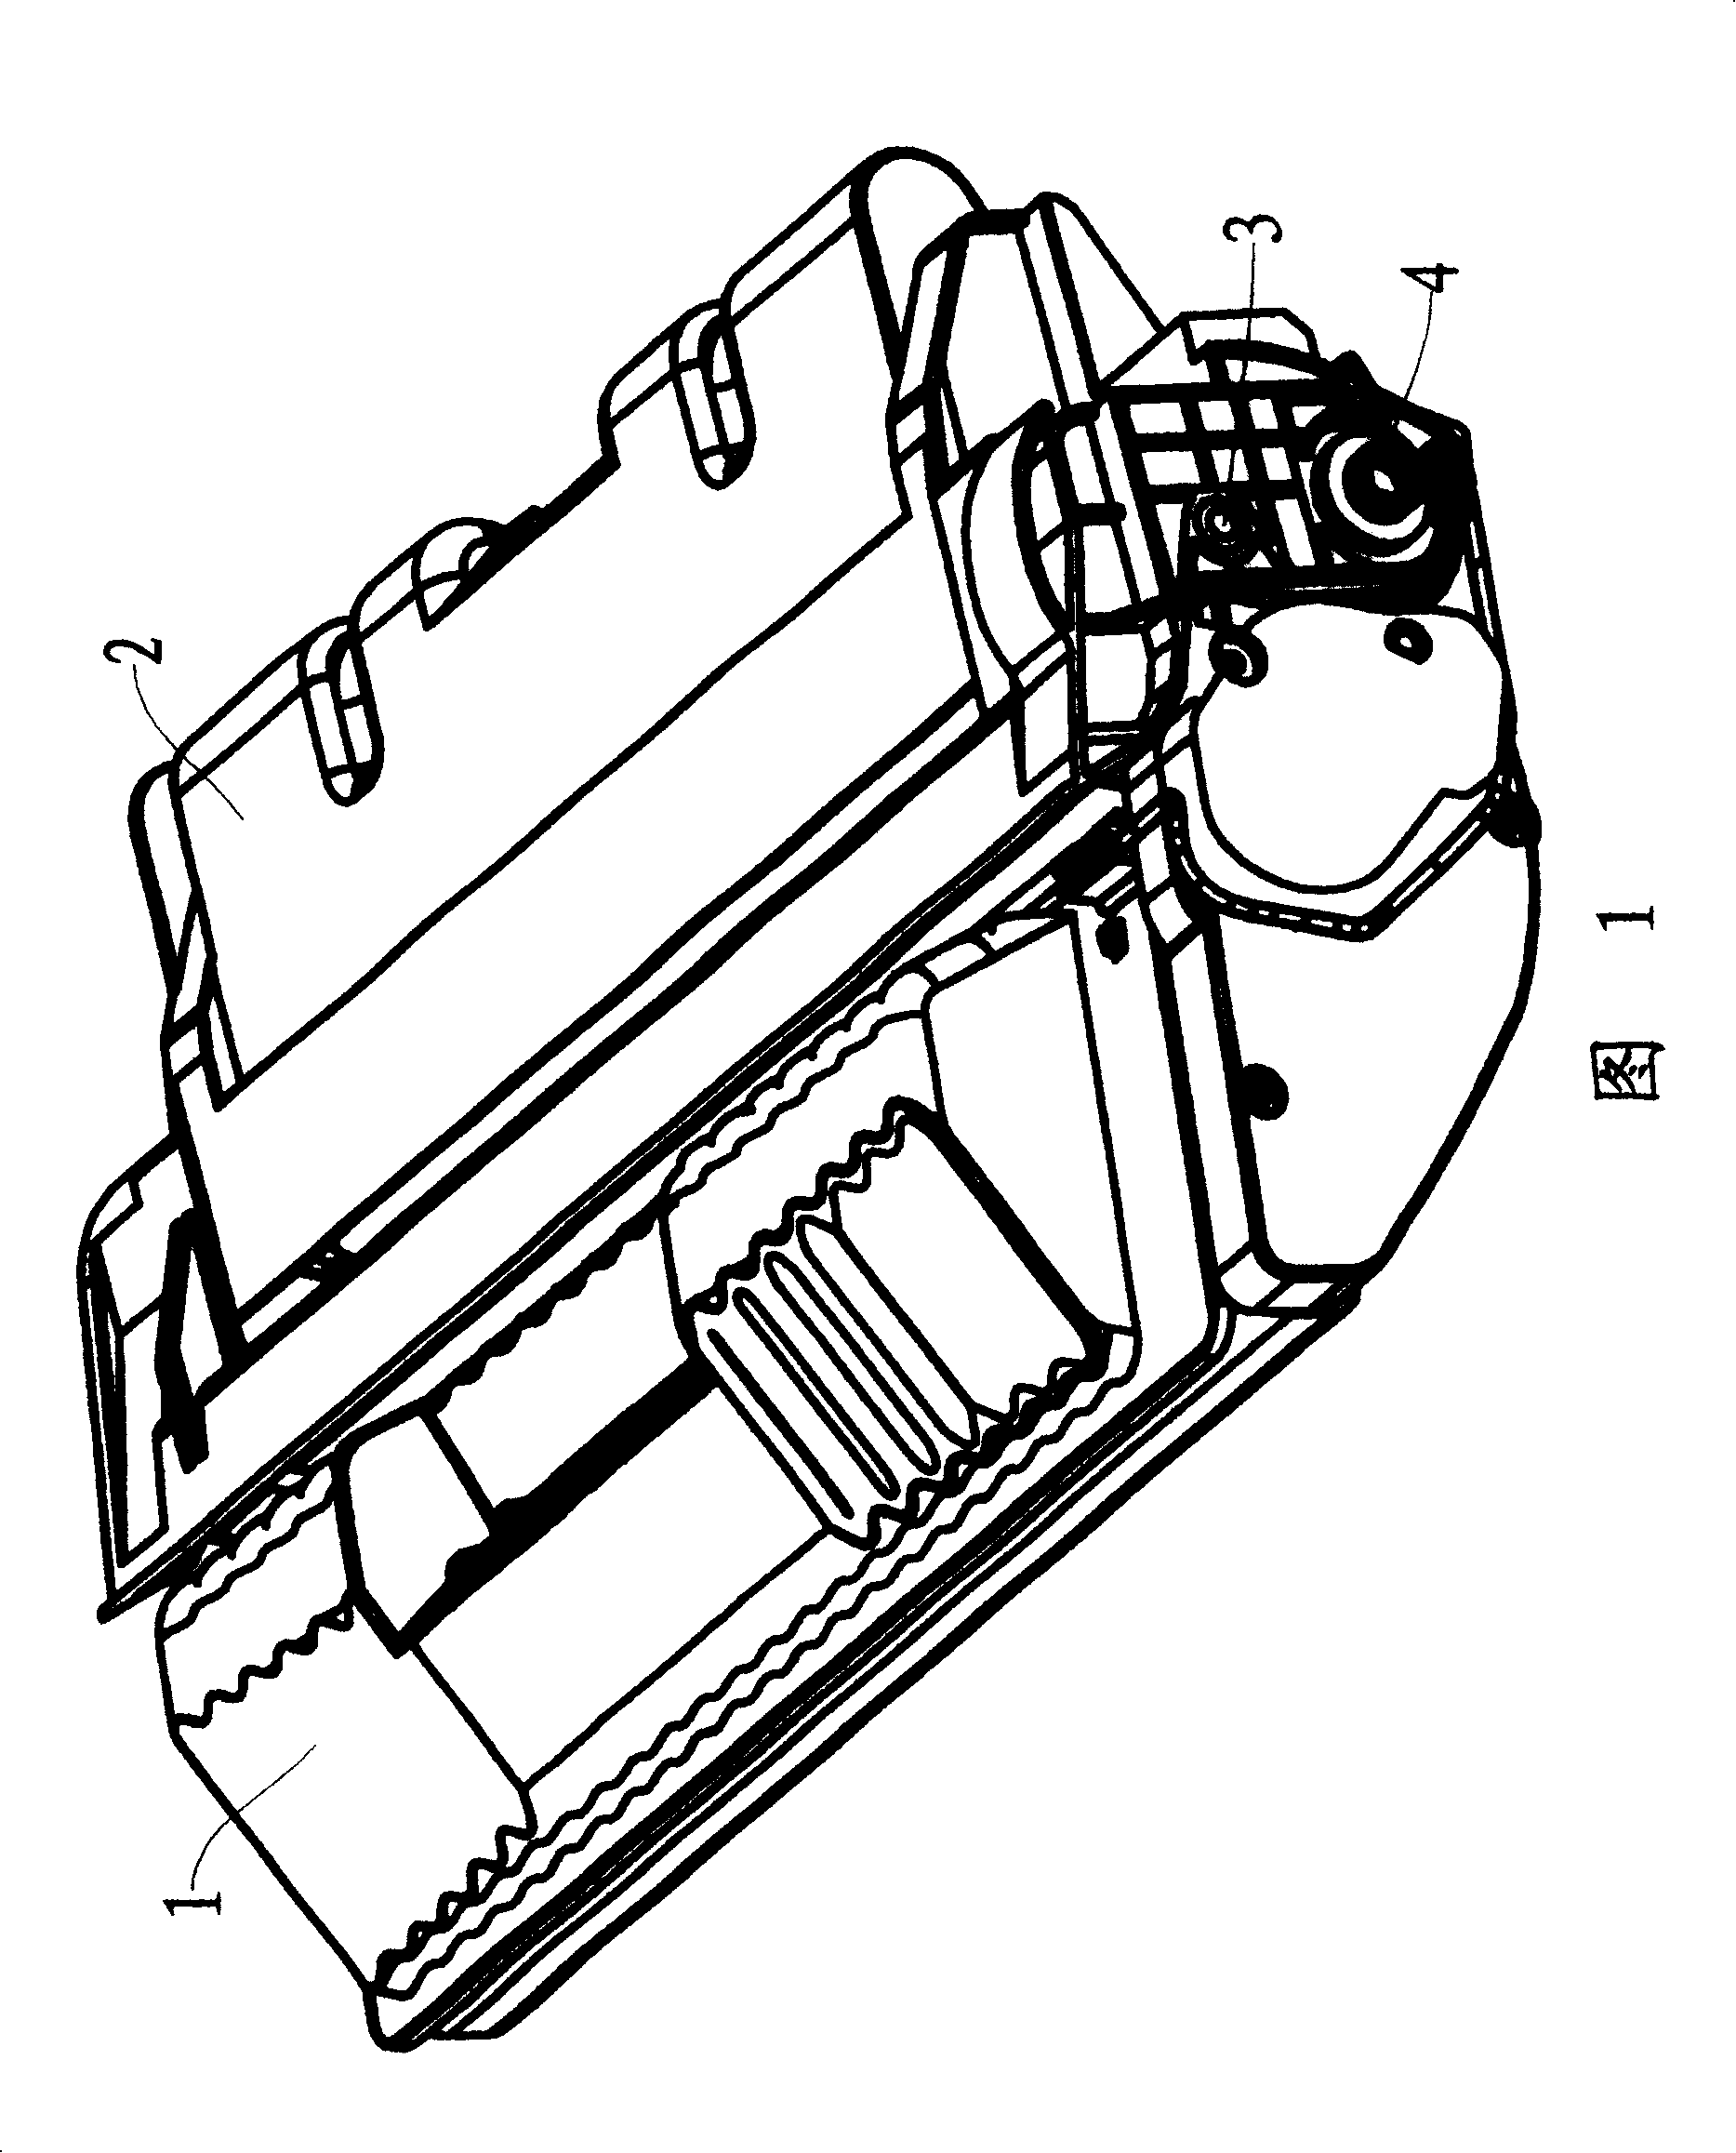 Processing cartridge with power inputting buffer unit